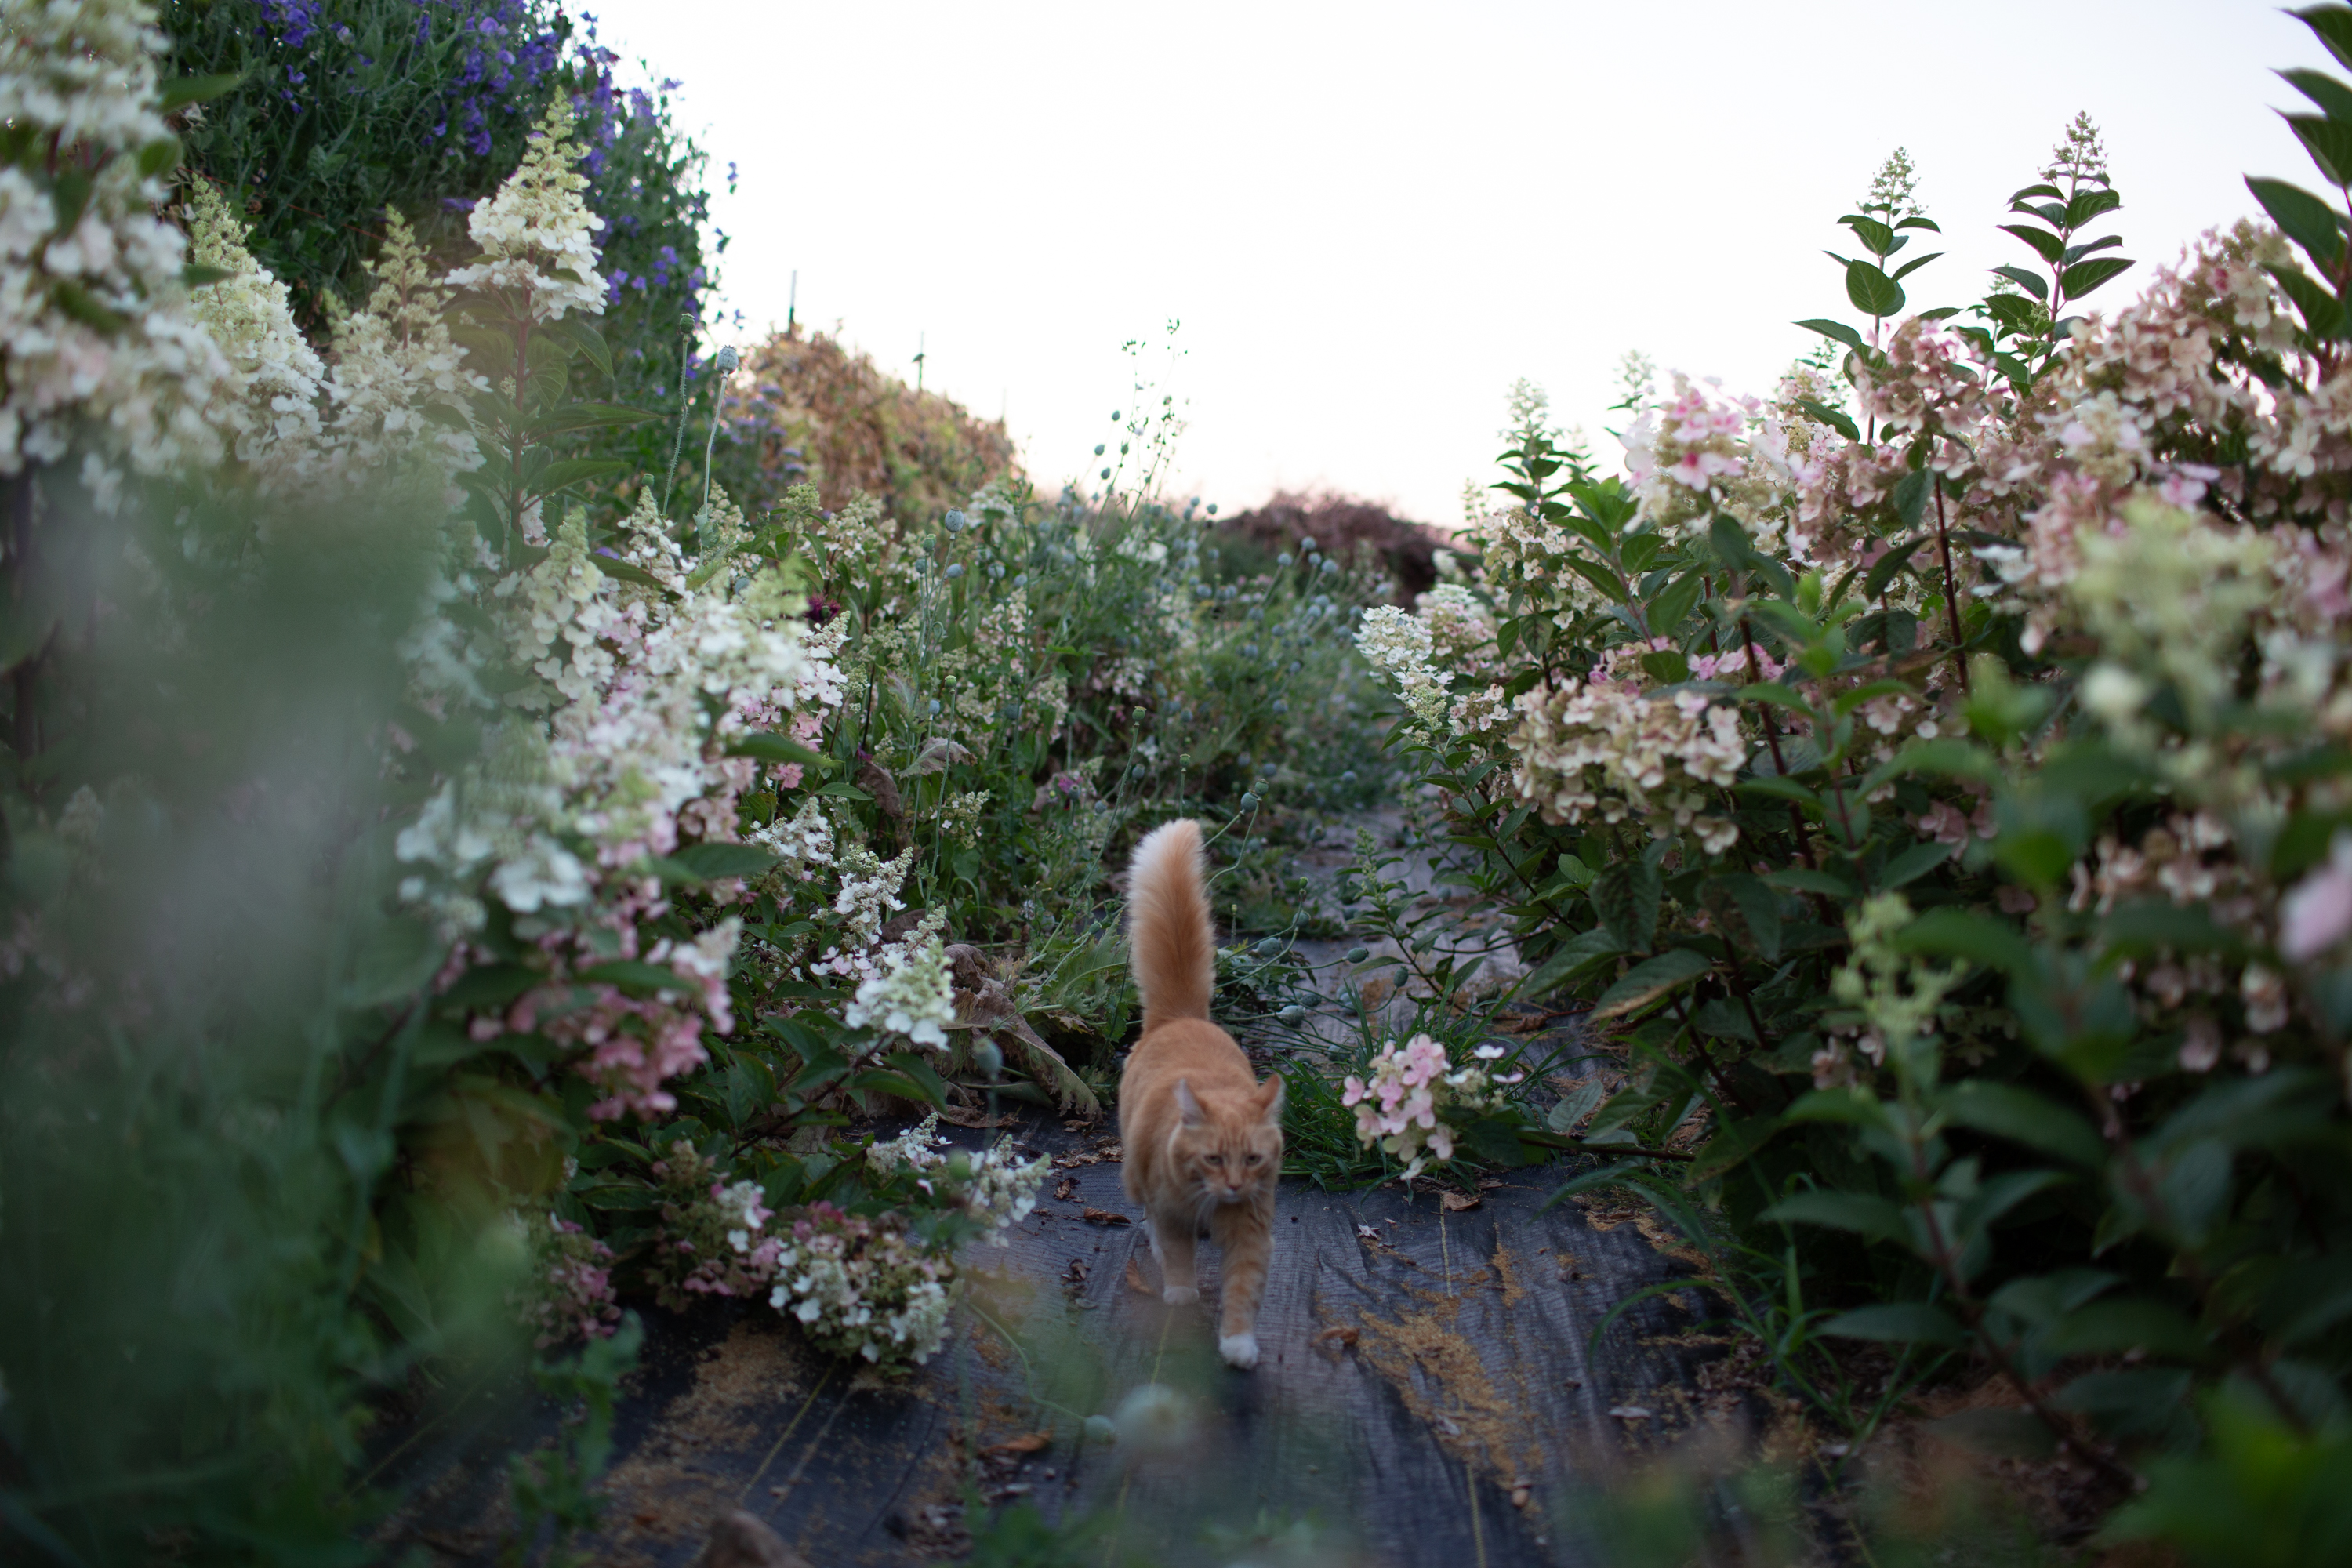 Timmy the cat in a row of flowers